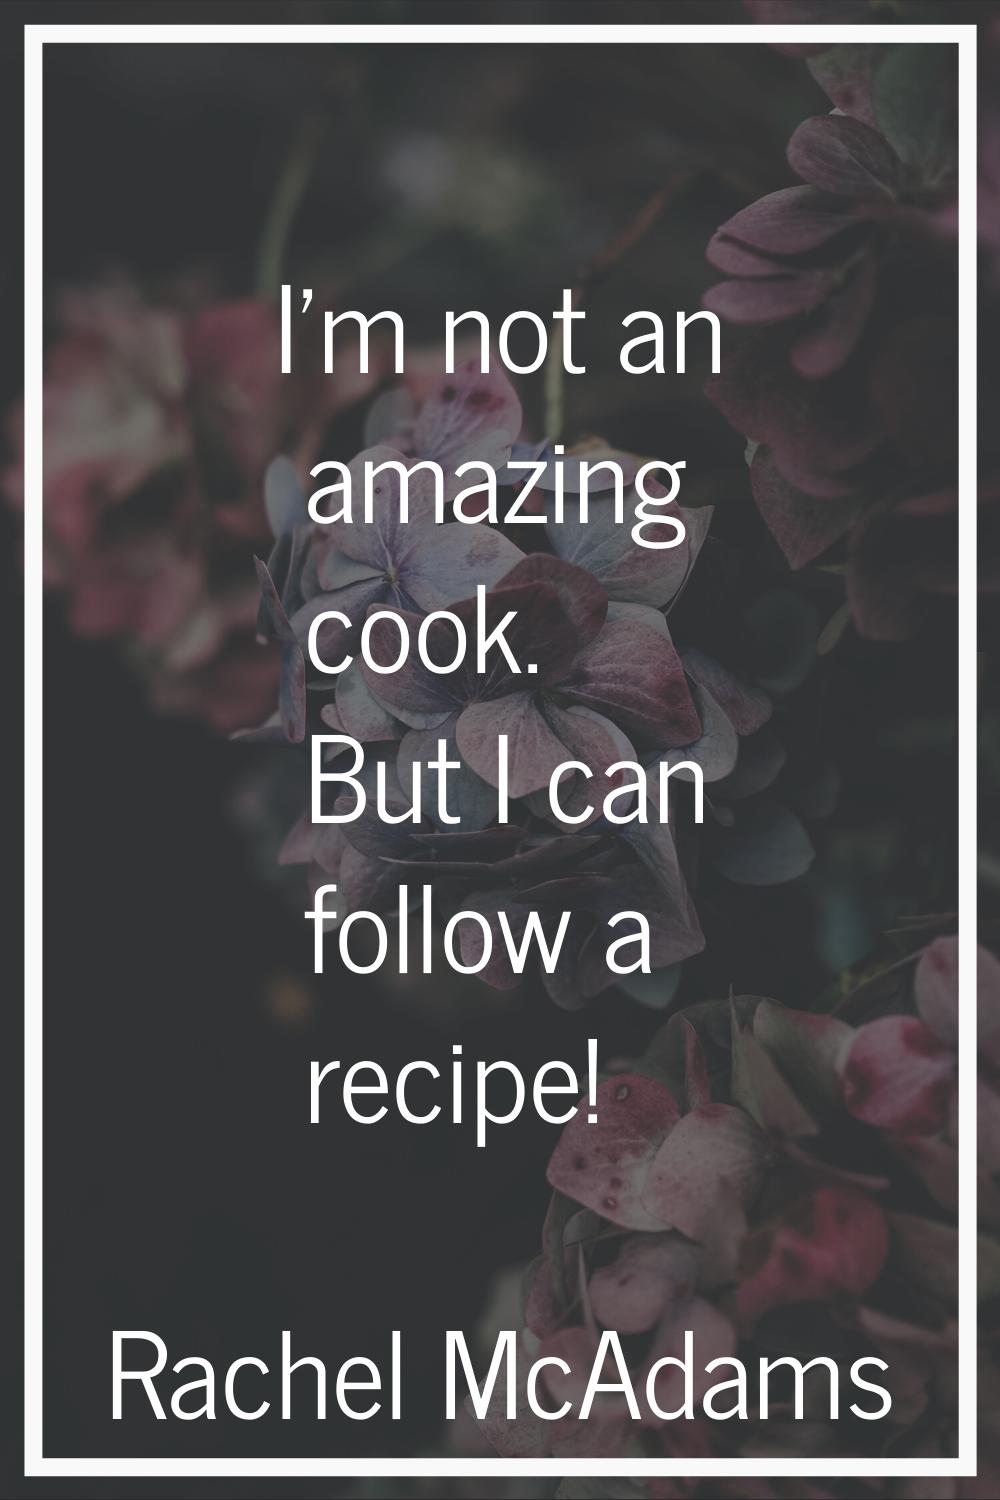 I'm not an amazing cook. But I can follow a recipe!